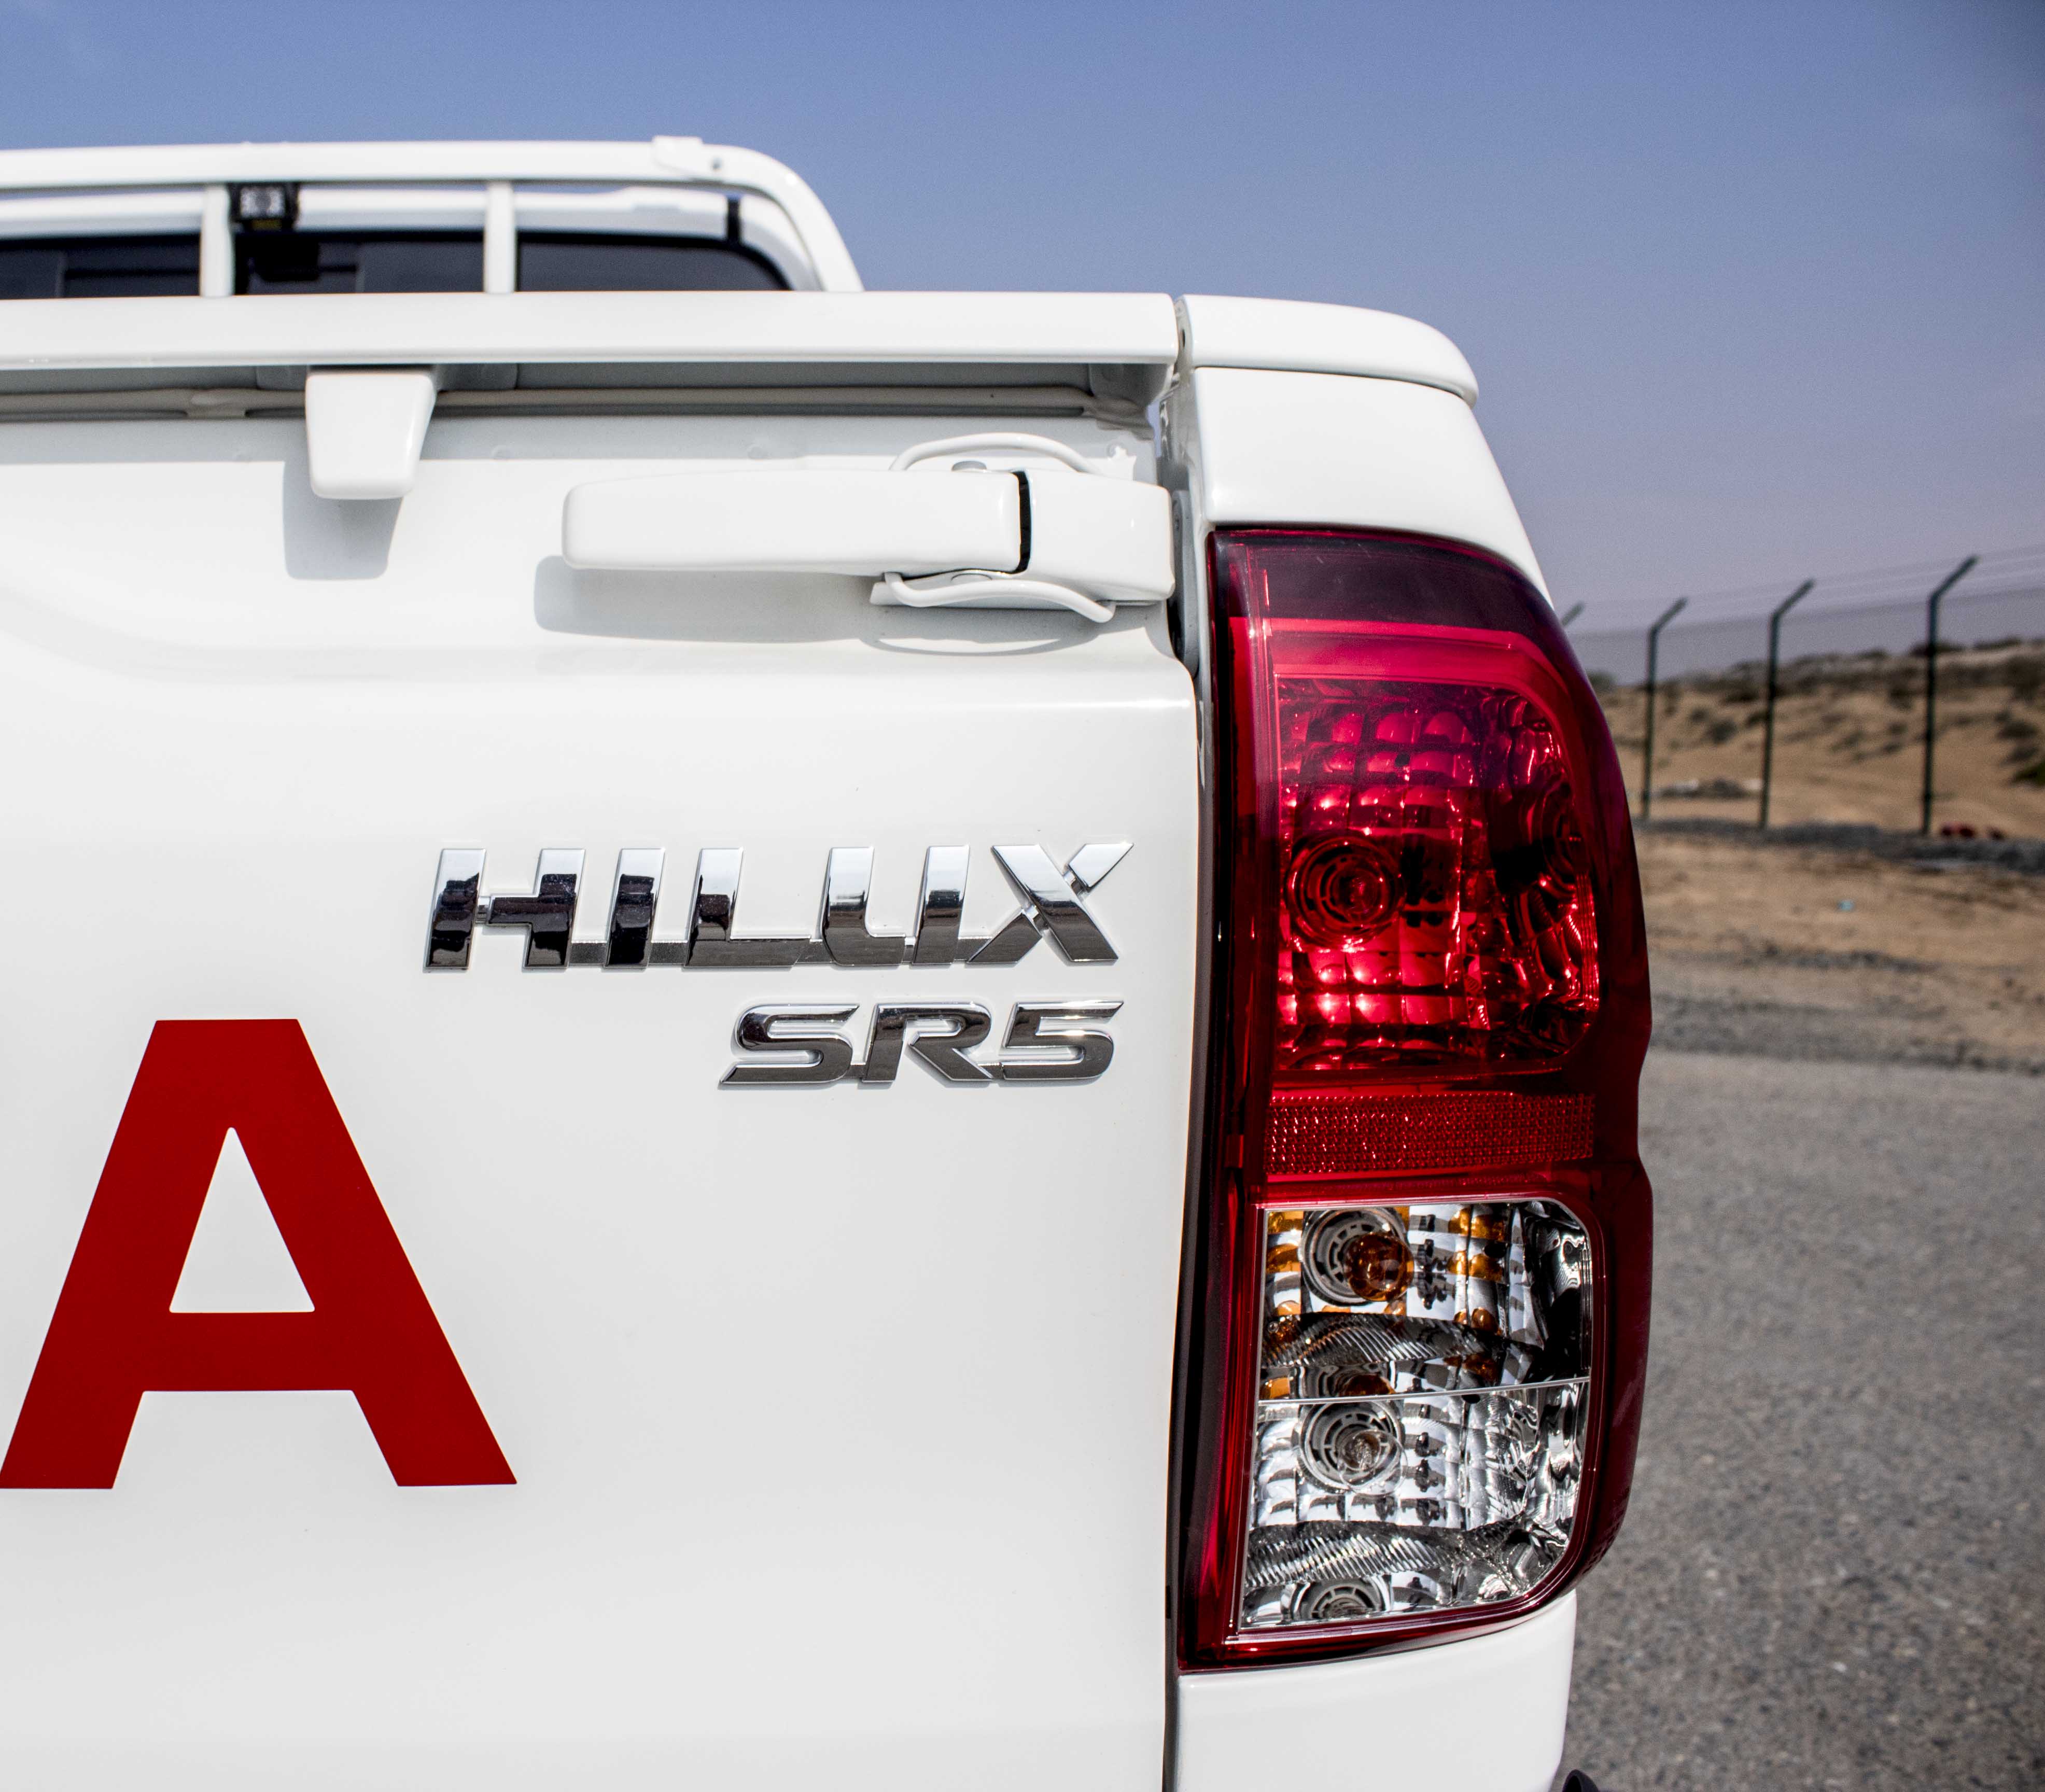        The Armoured Toyota Hilux Pick Up